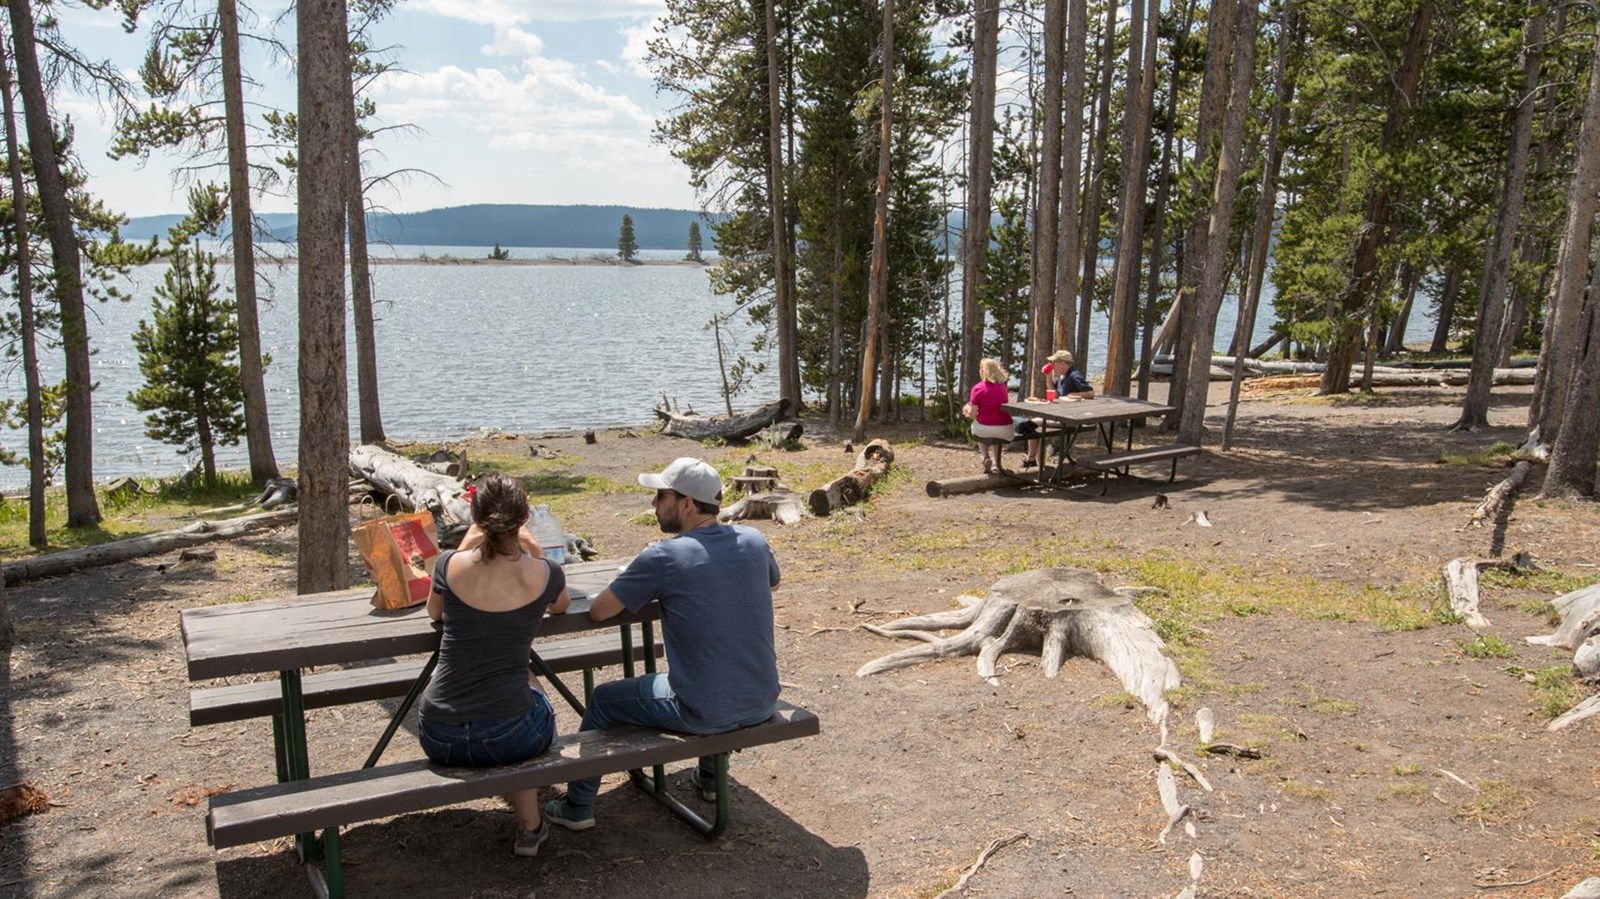 People picnicking at tables in a forested area near a lake shore